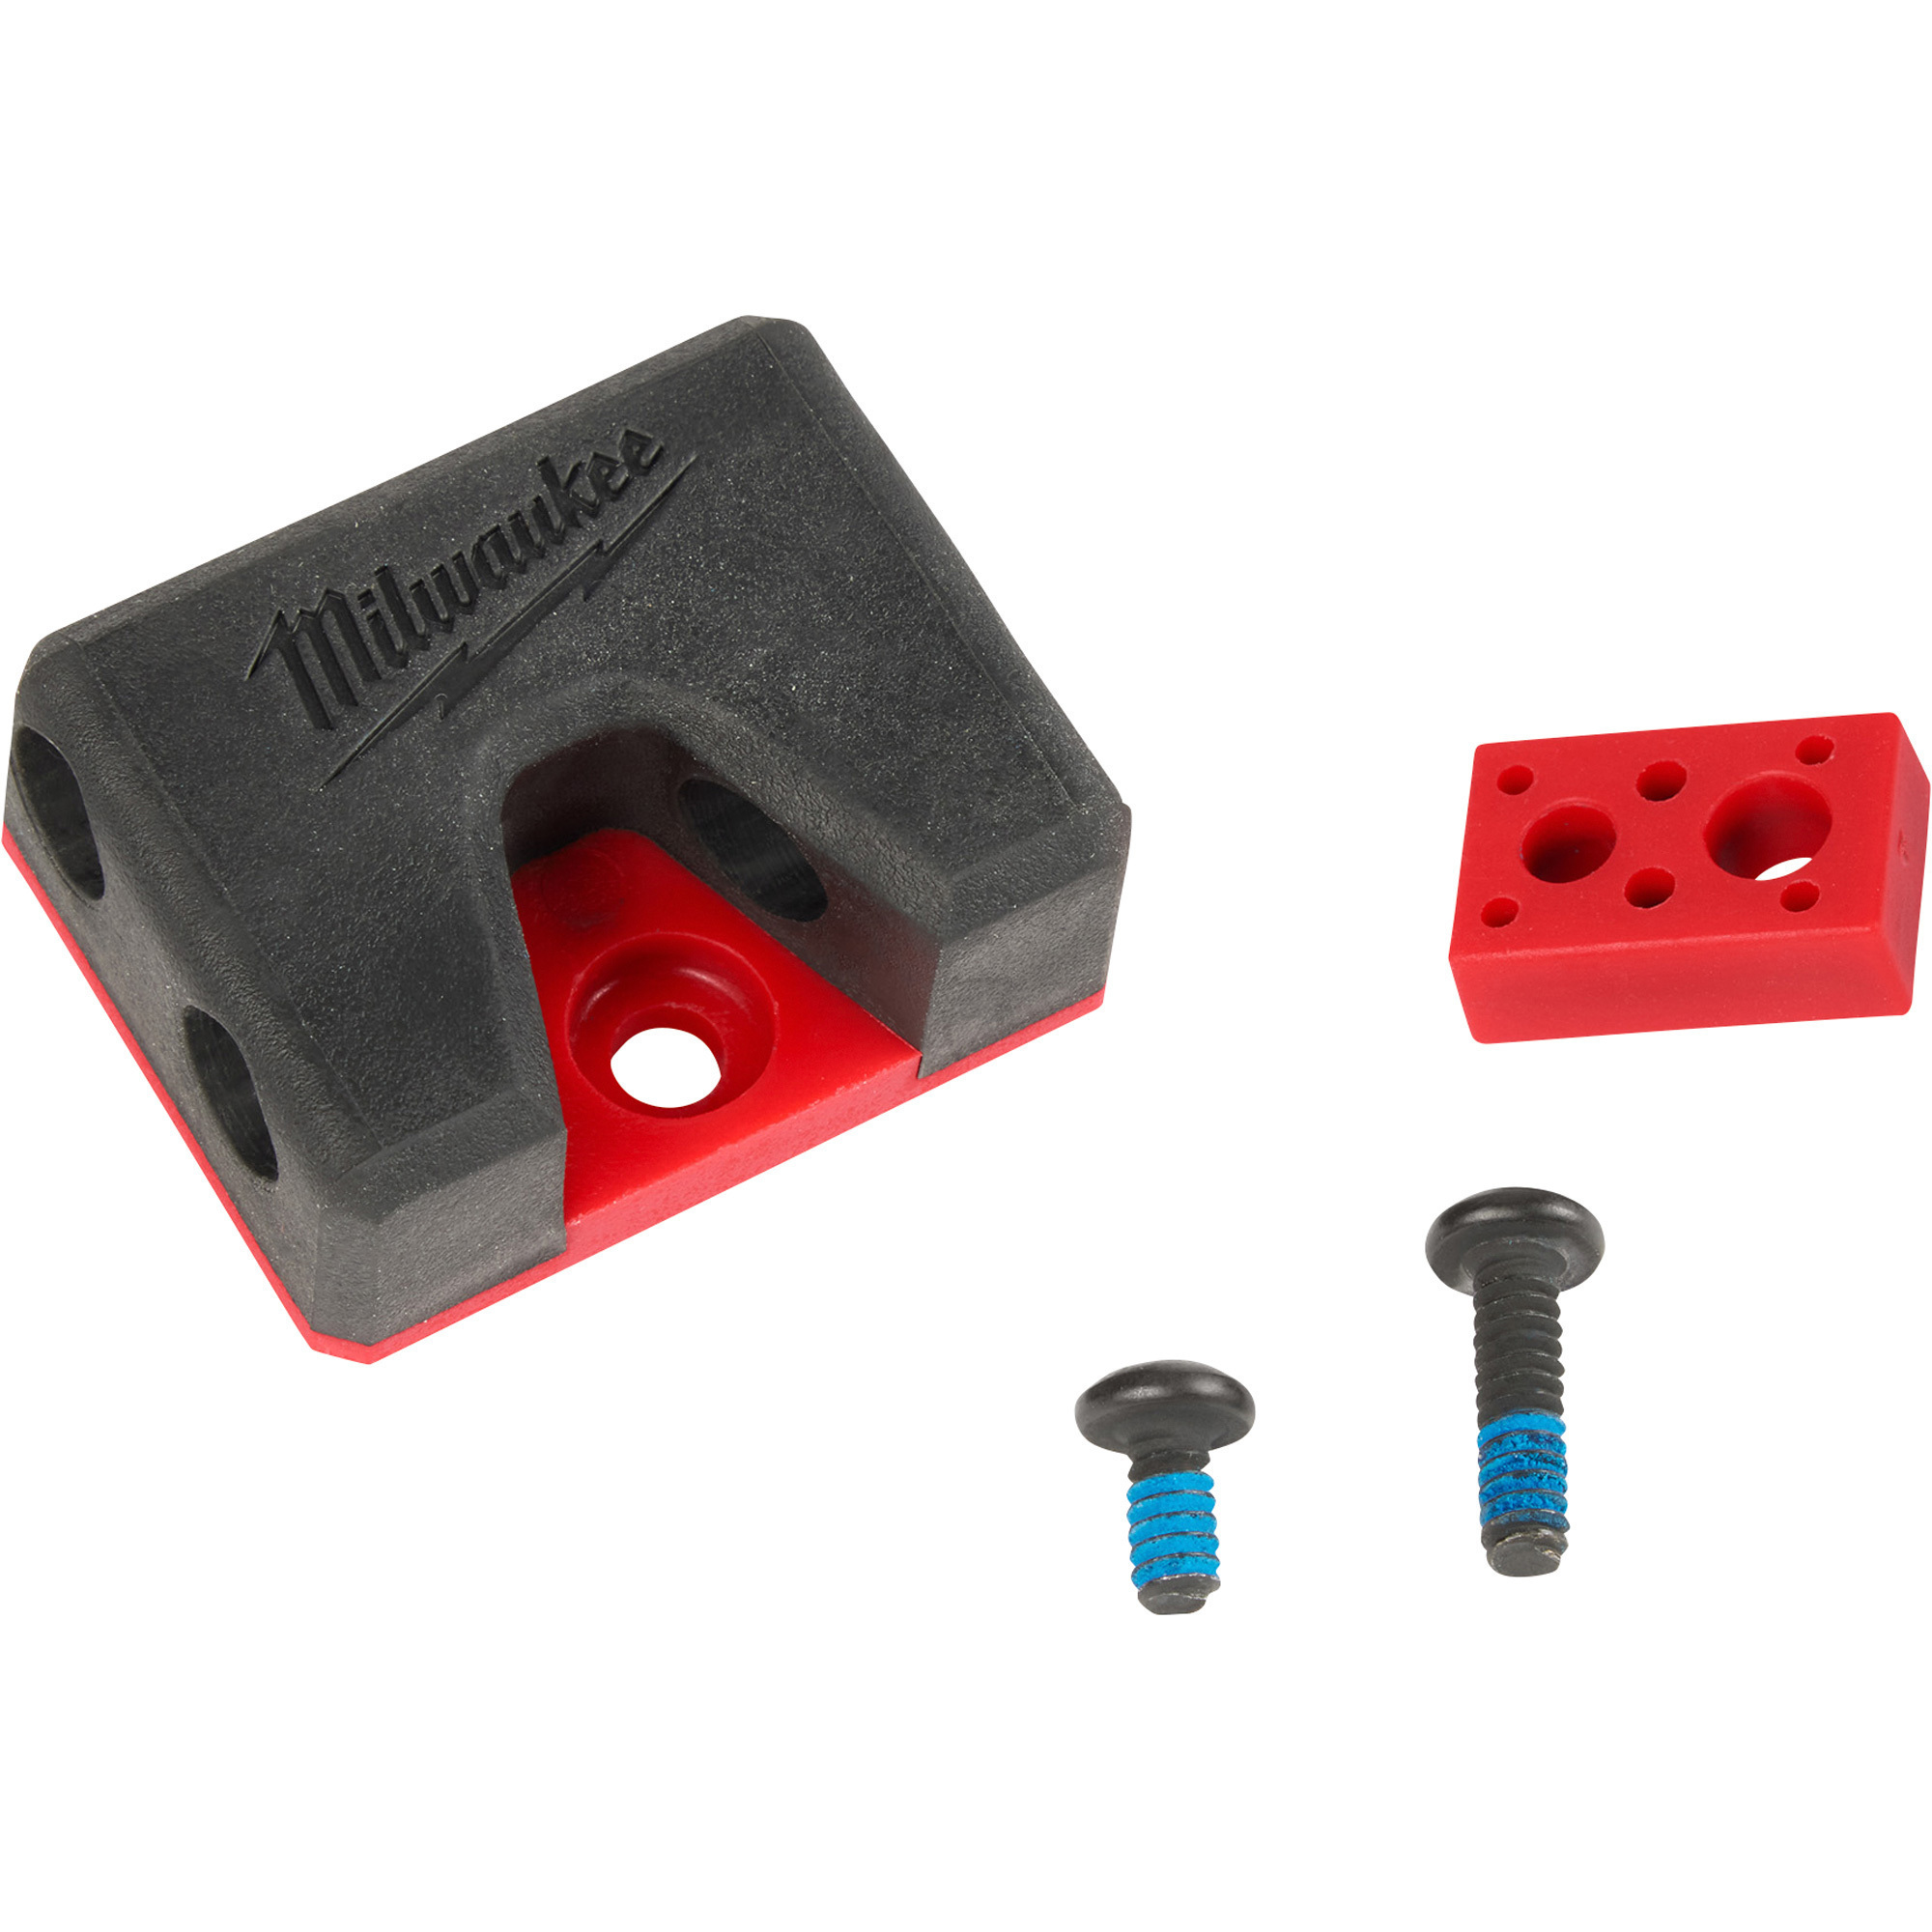 Milwaukee Drilling and Driving Bit Holder Accessory, For use with M18 and M12 FUEL Drill Bits, Model 49-16-3697